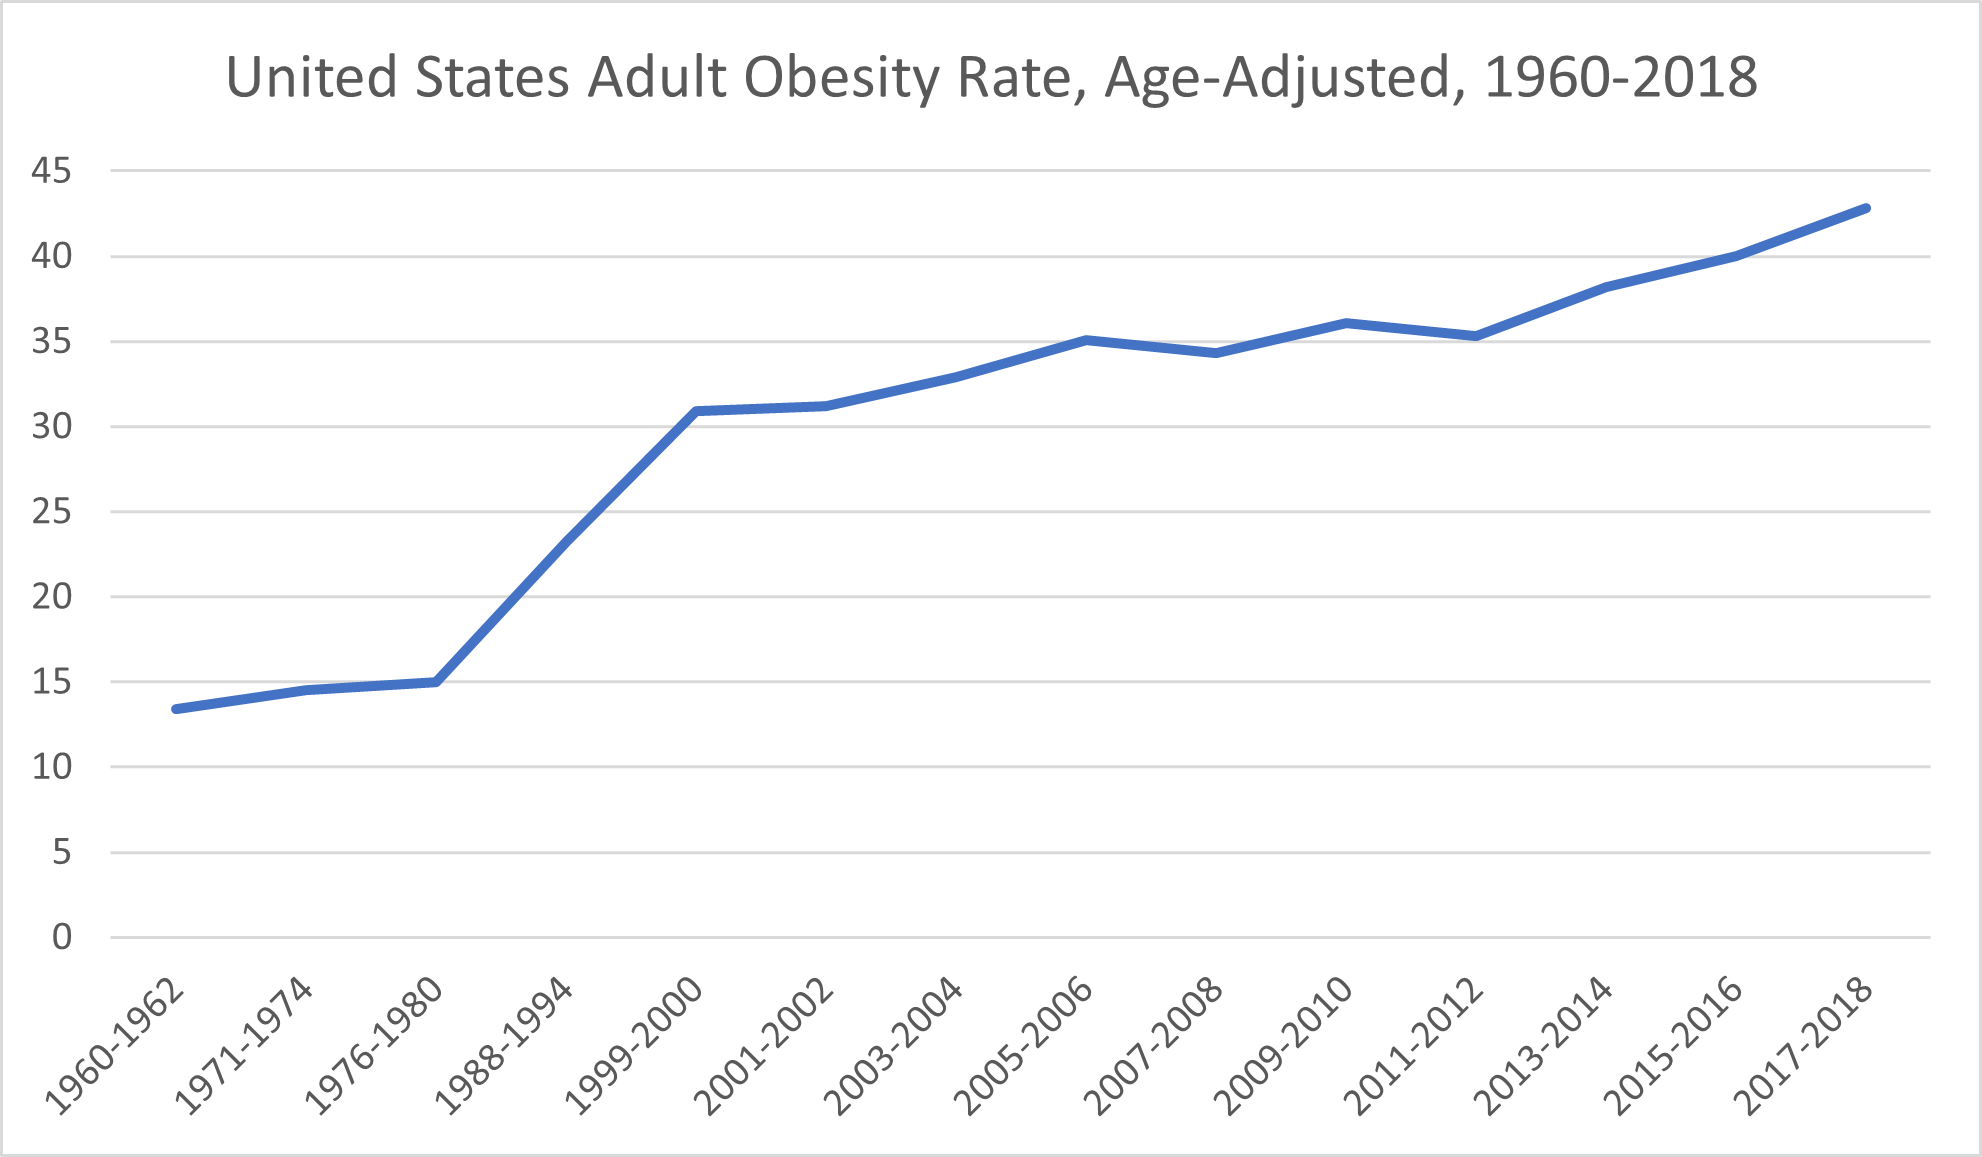 United States Adult Obesity Rate, Age-Adjusted, 1960-2018 